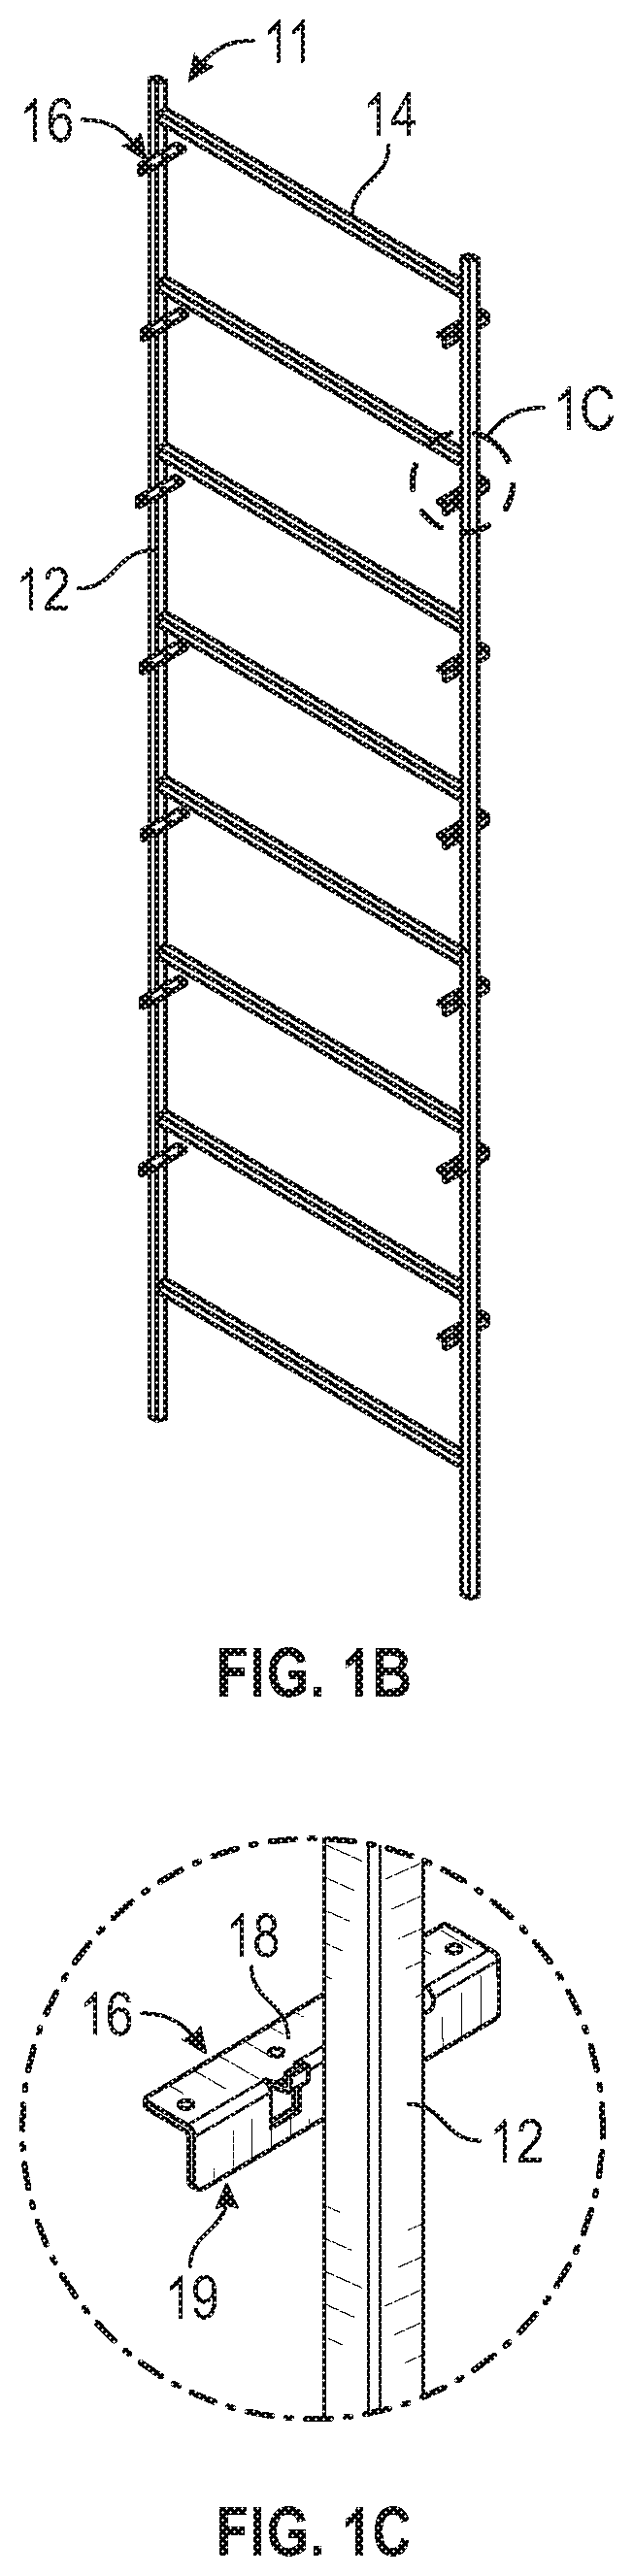 Apparatus and Method to Form and Mount Pans